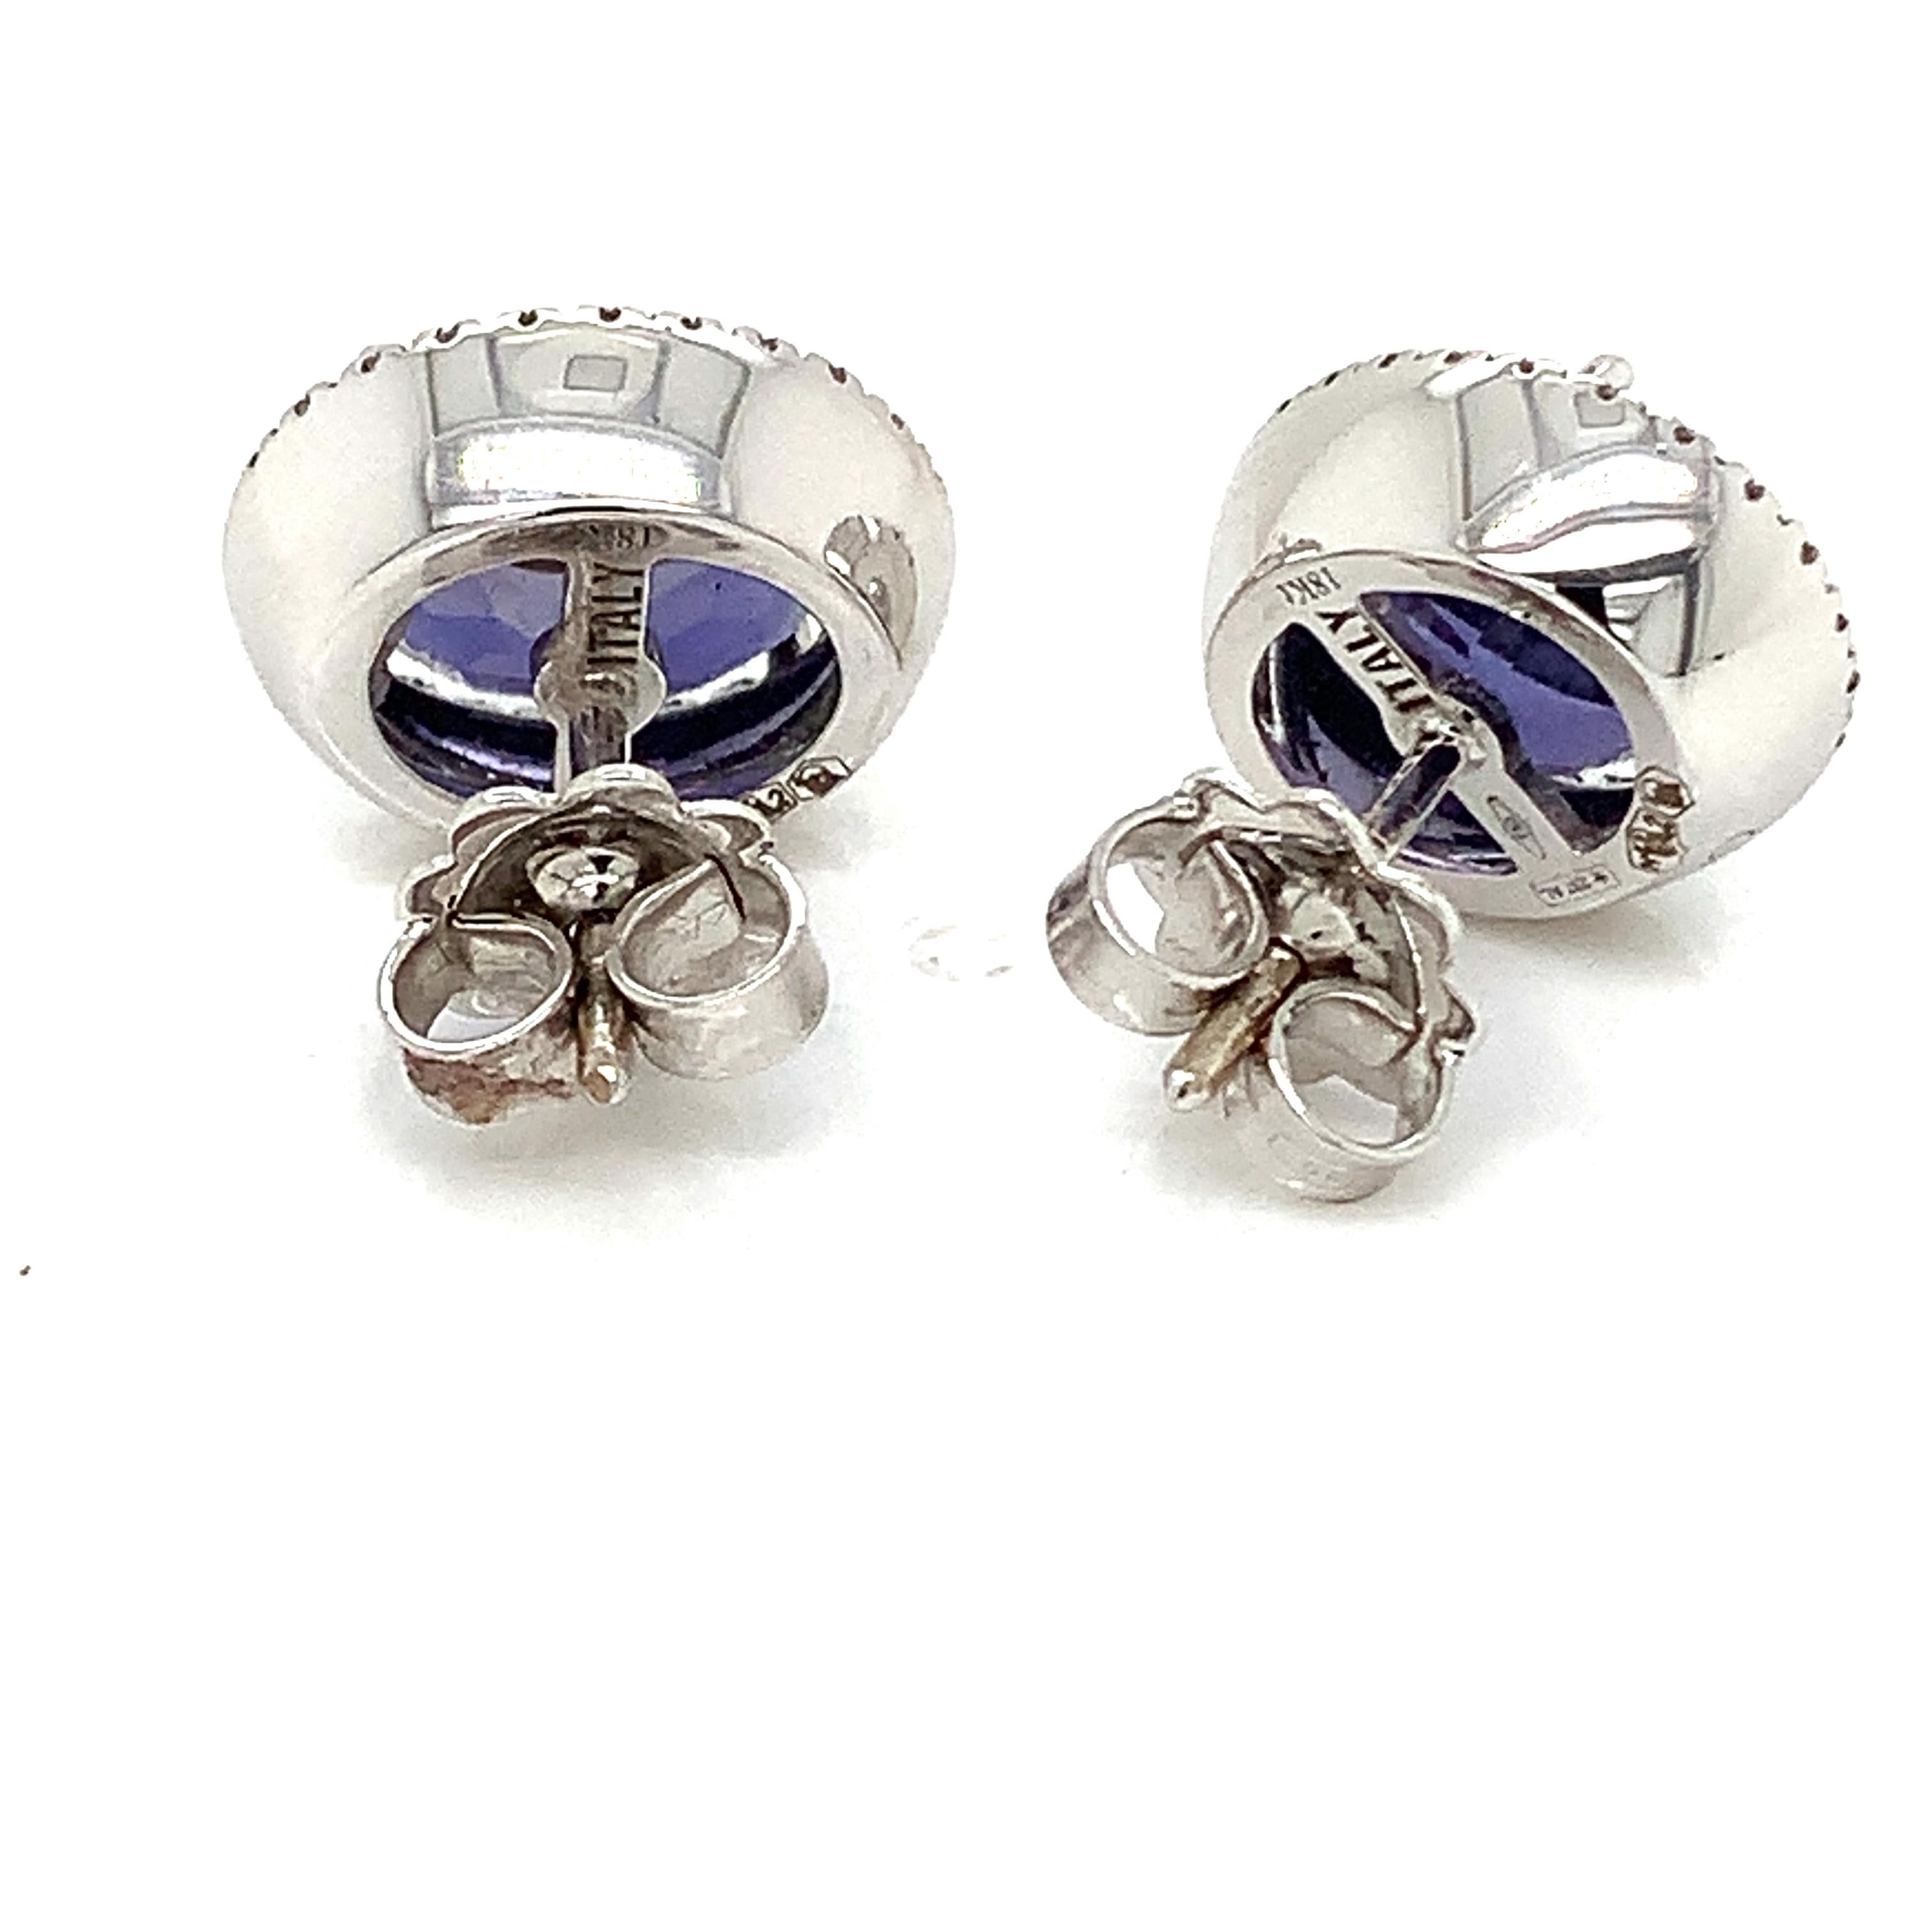 Contemporary 18 Kt White Gold Oval Shape Stud Earrings in Iolite and Diamonds by Garavelli   For Sale